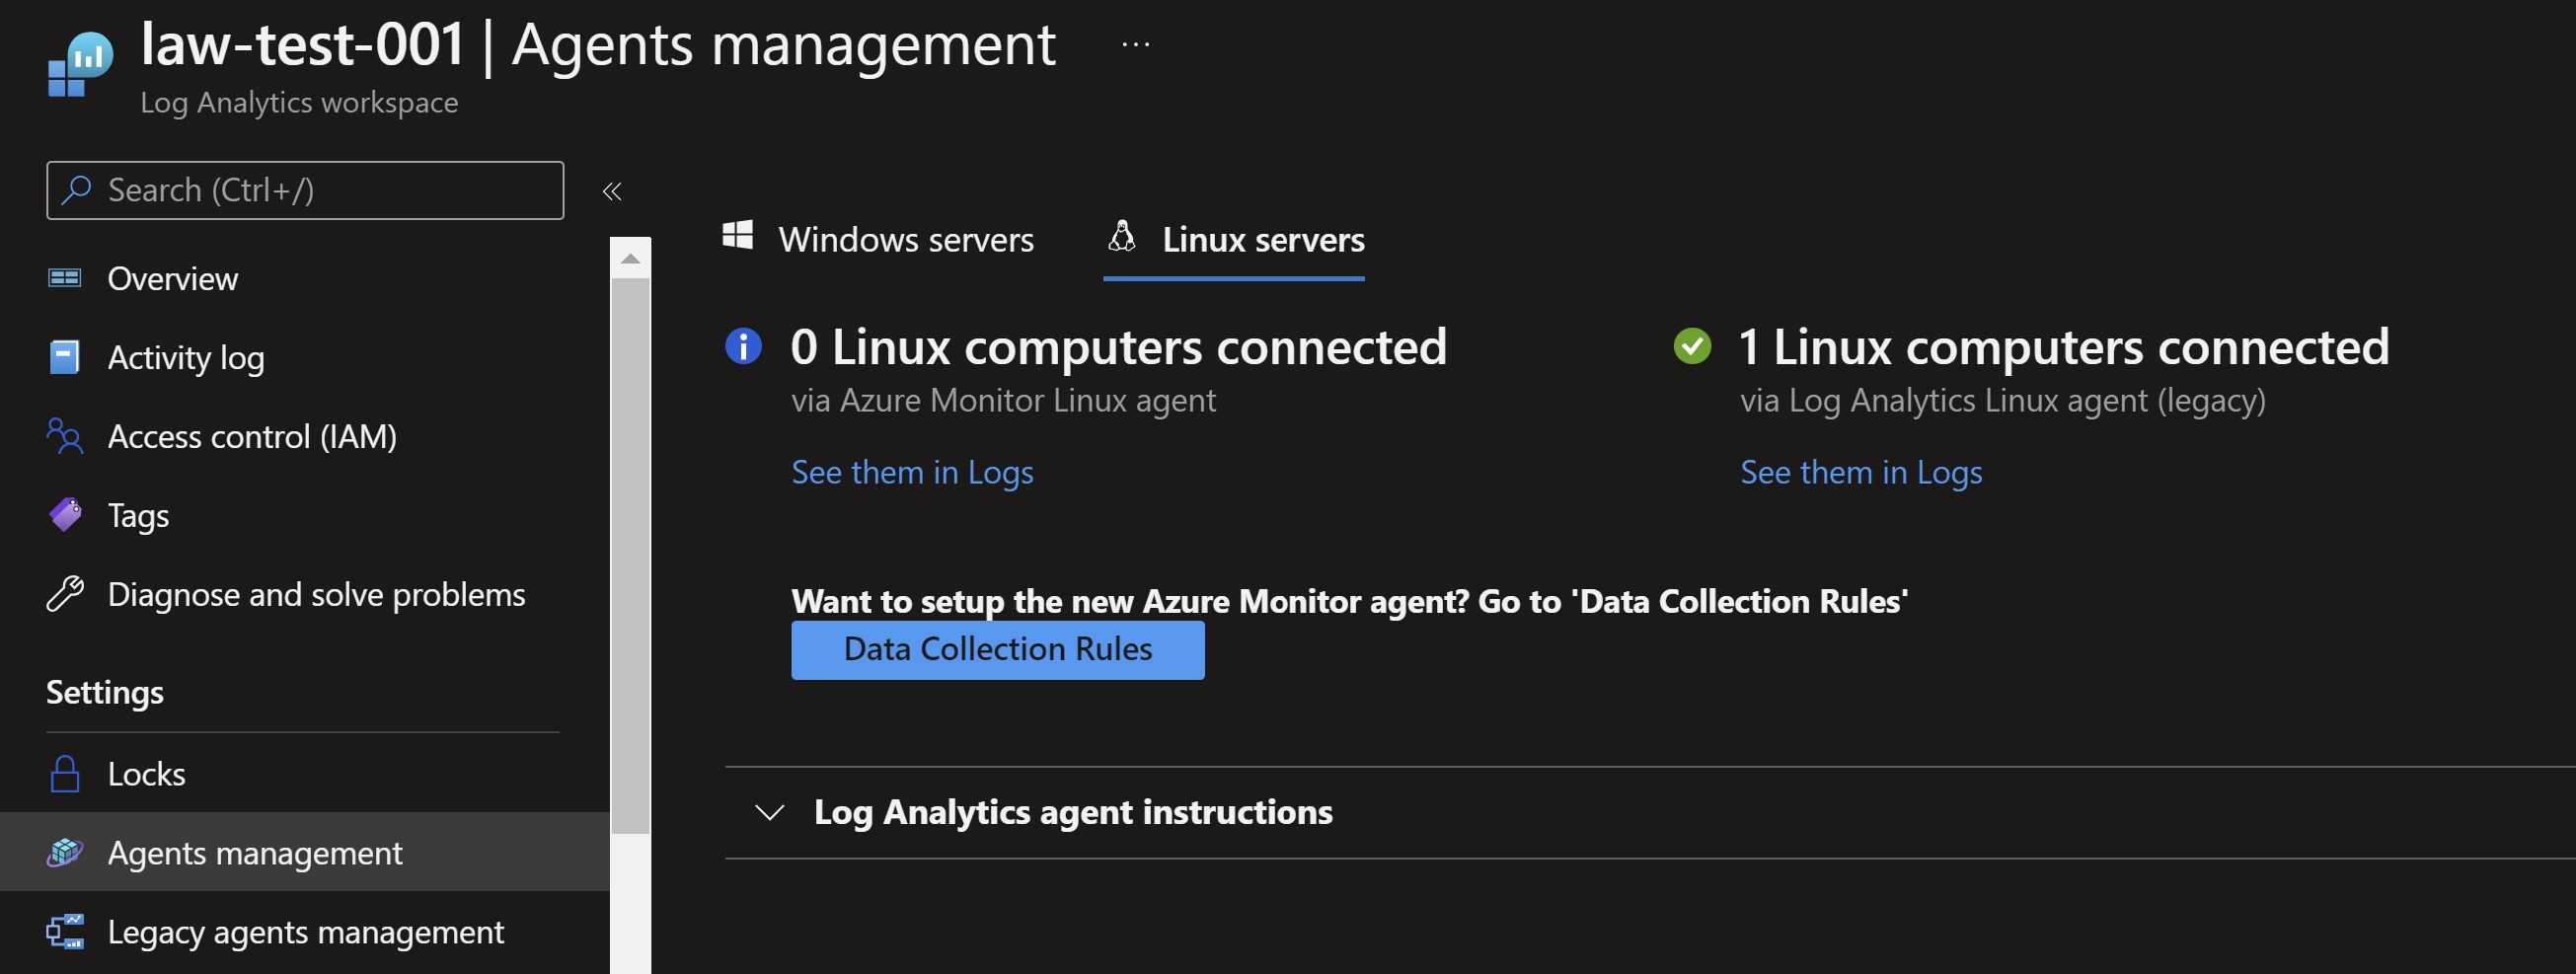 Screenshot showing the Linux VMs connected to the log analytics workspace